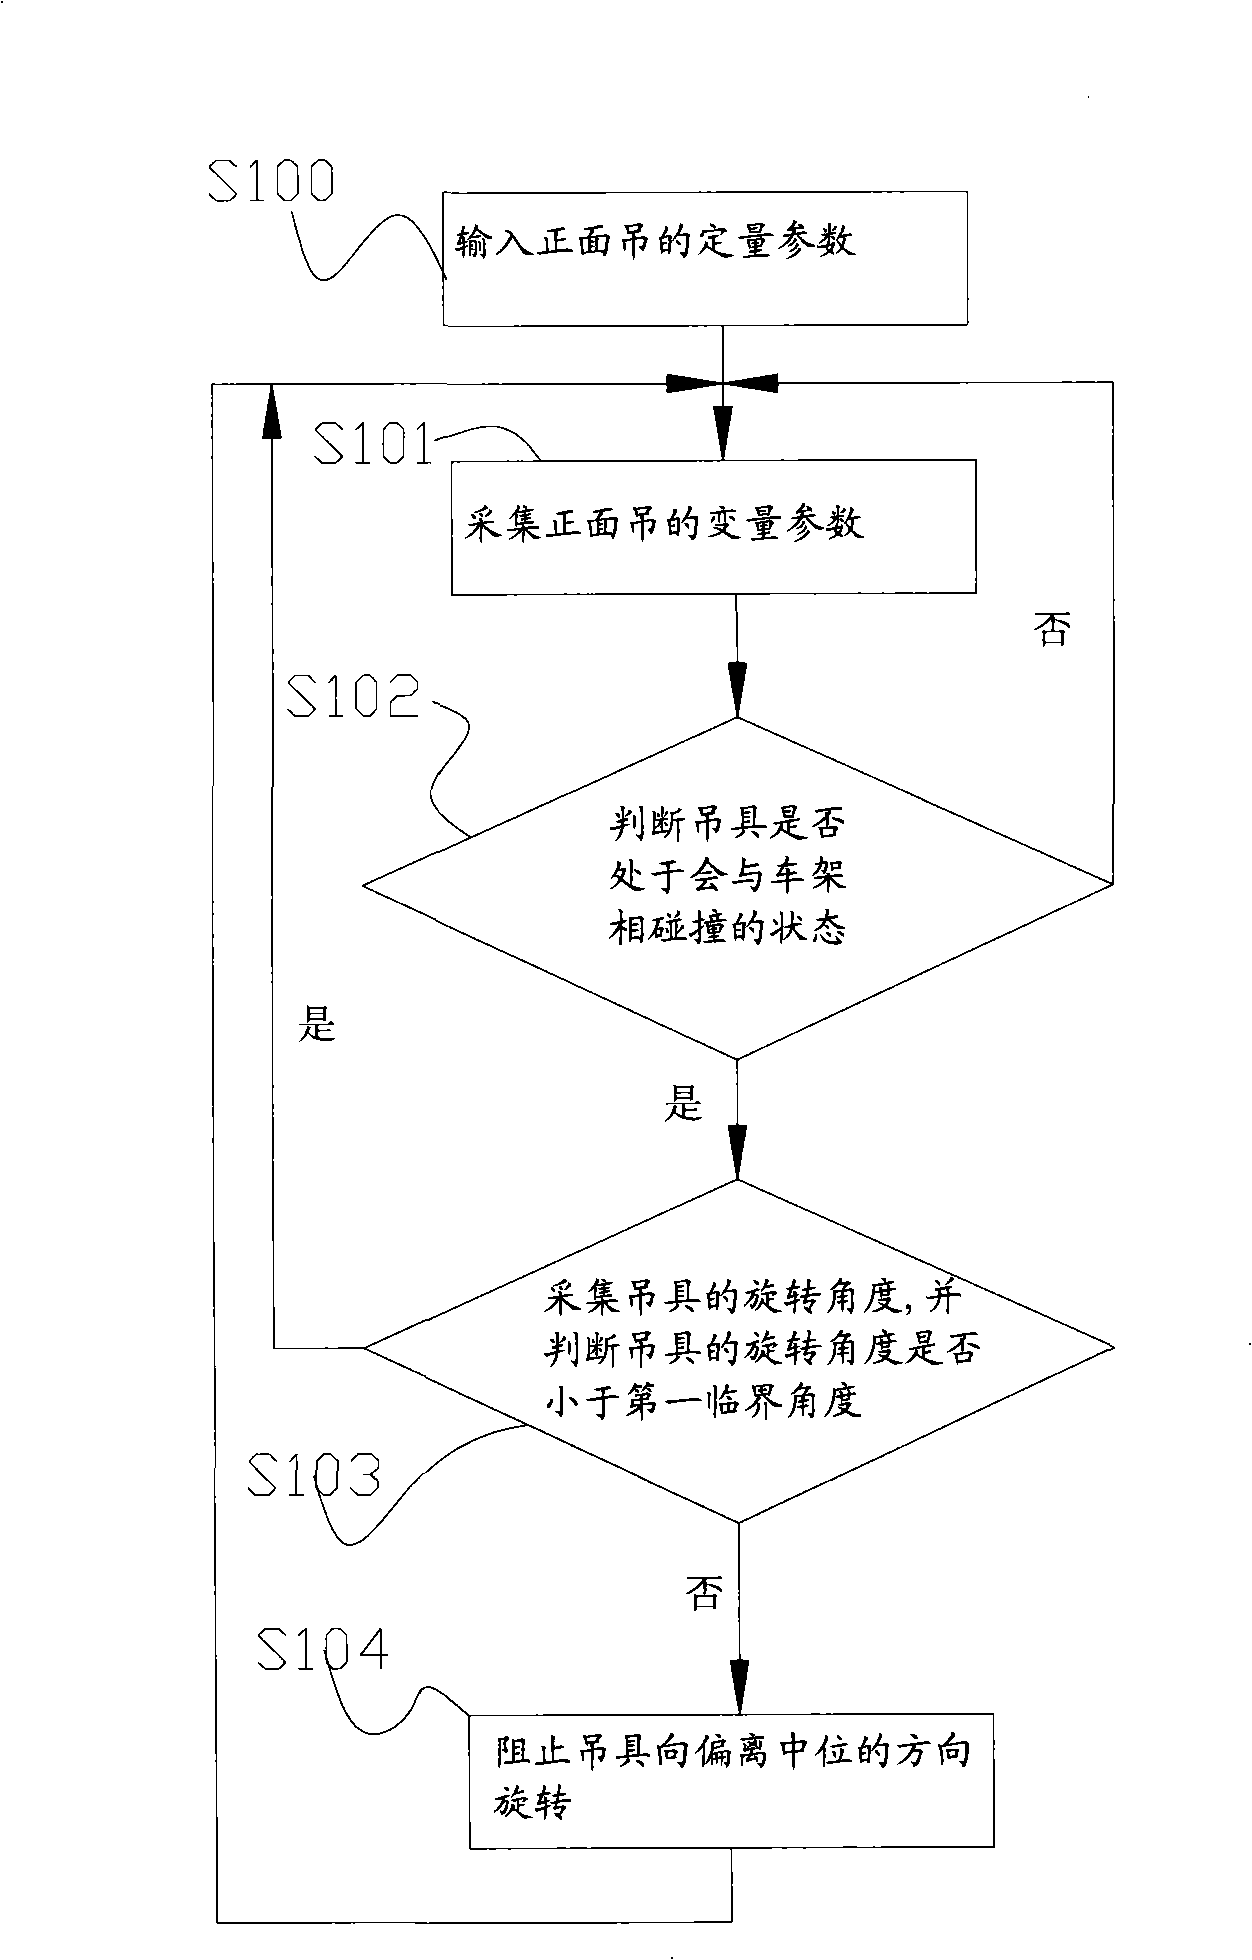 Control method and system for preventing collision of front sling and vehicle frame or/and cargo boom